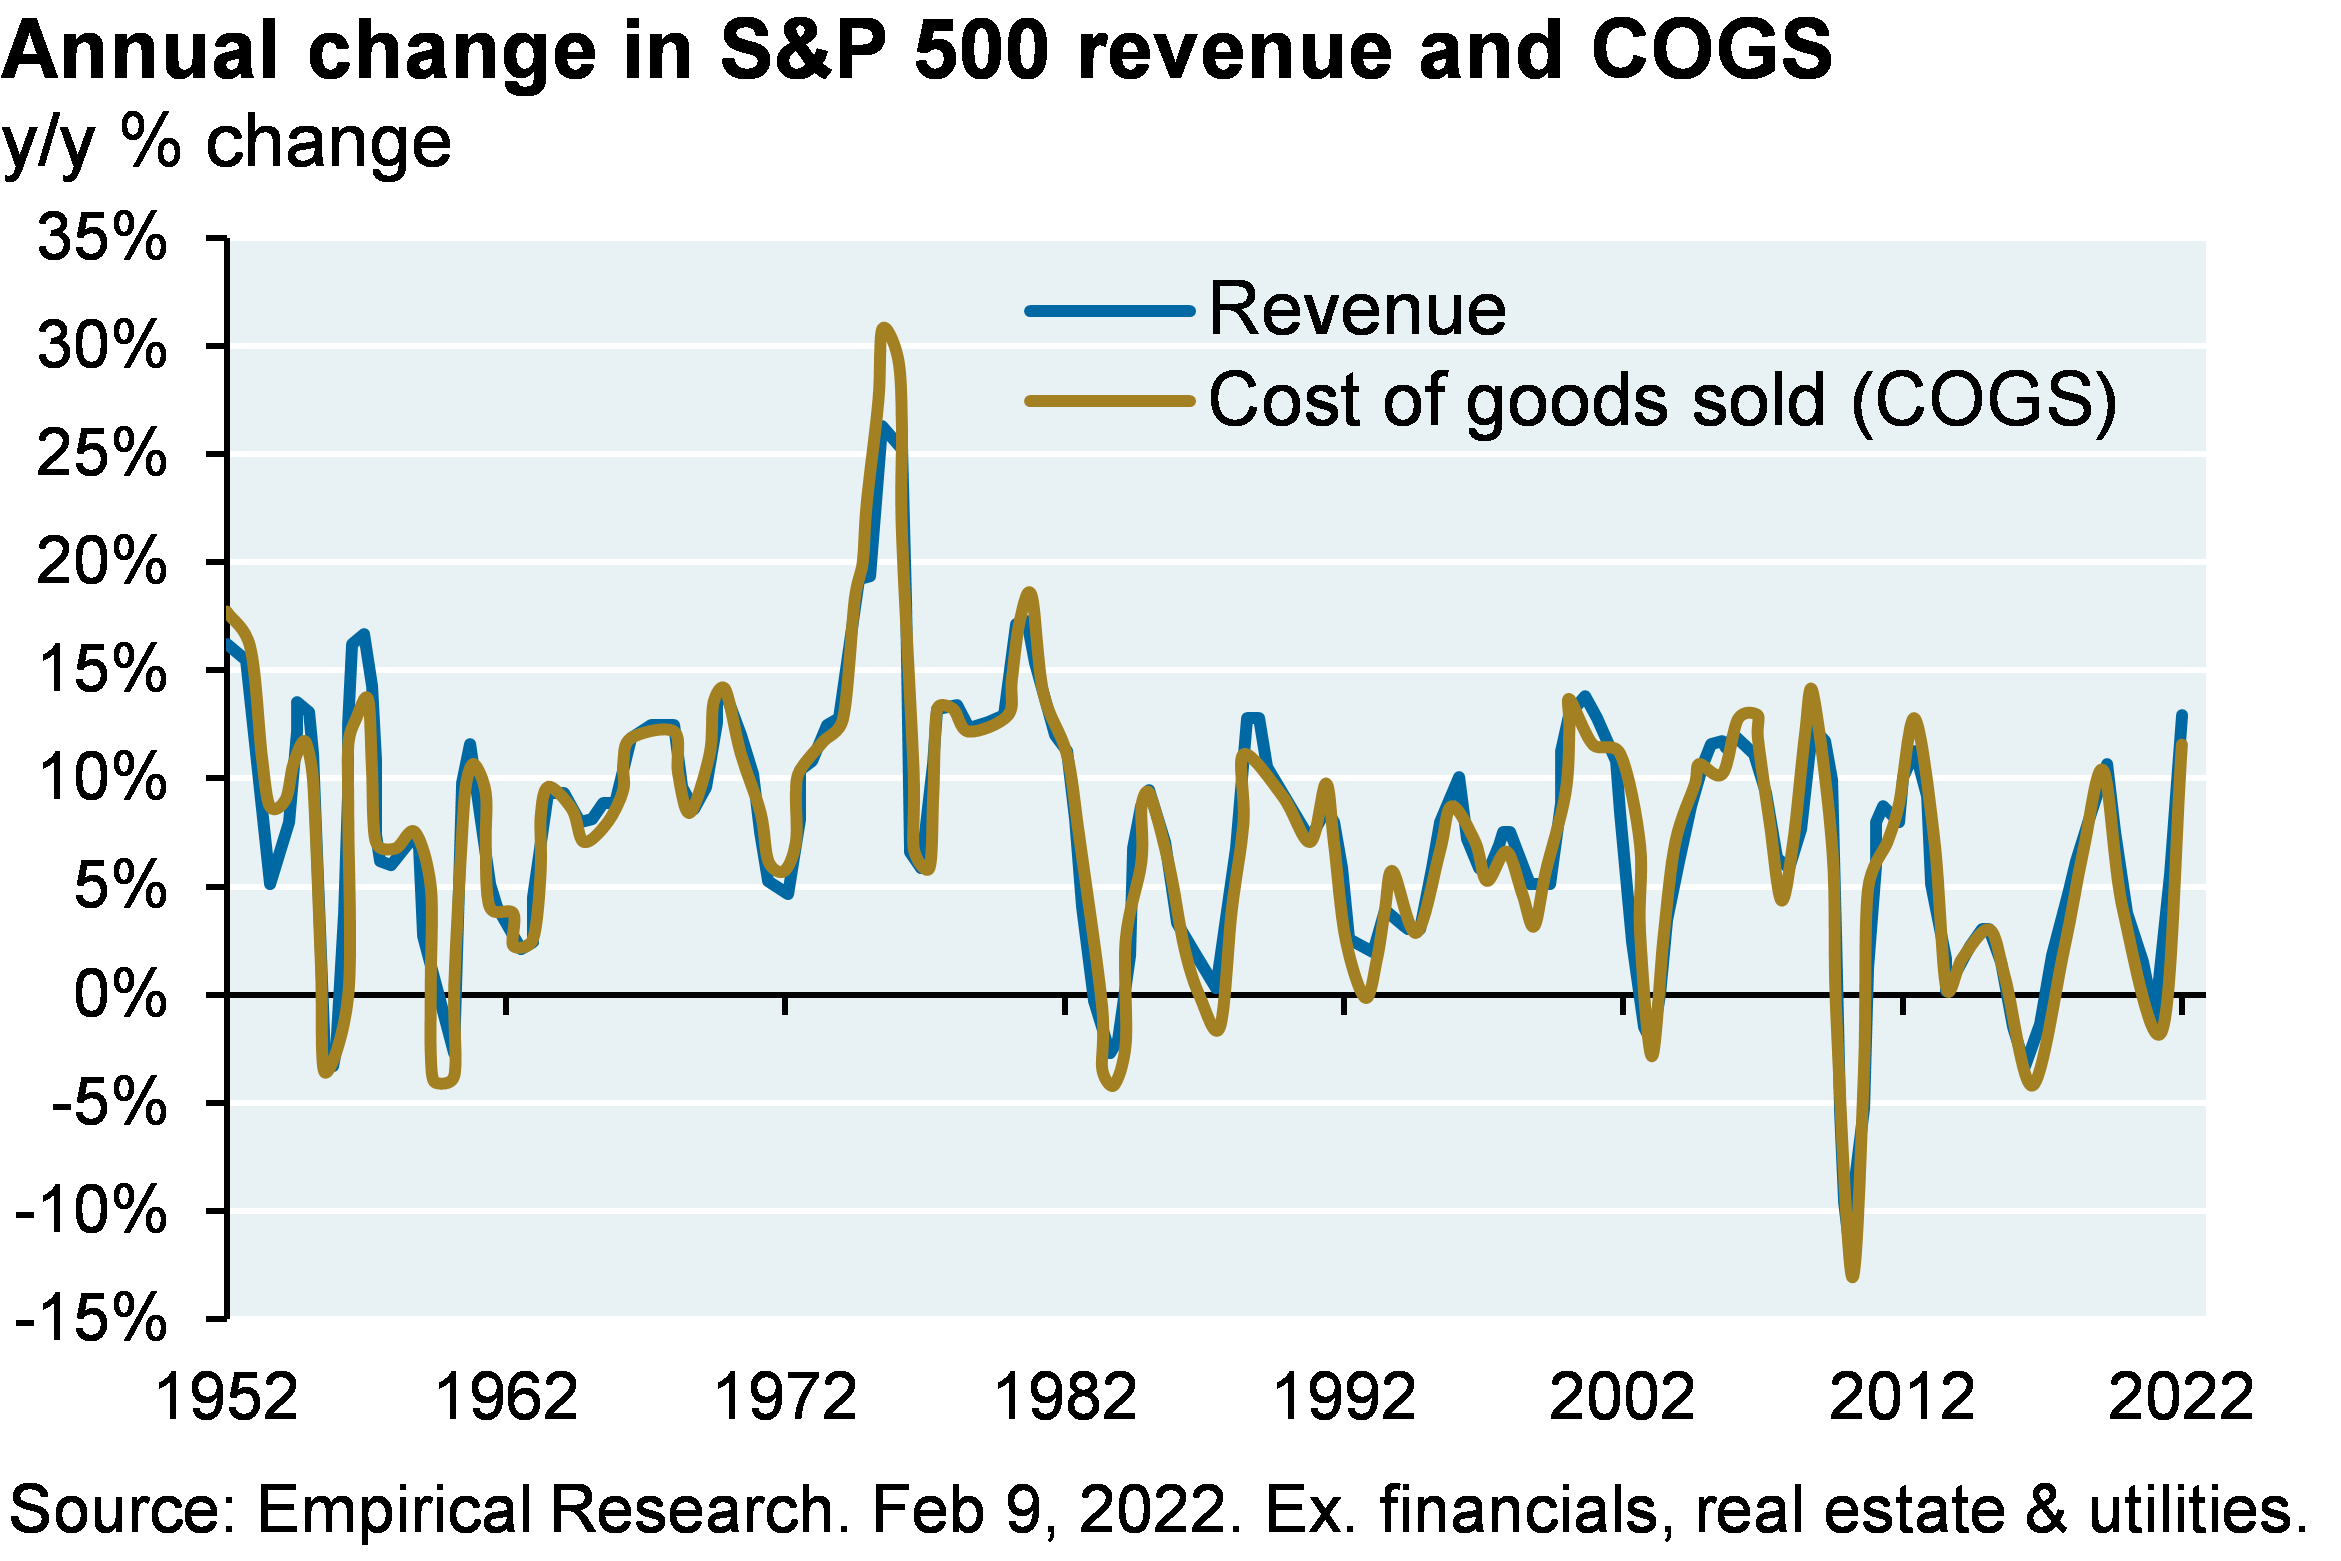 Line chart shows the annual change in S&P 500 revenue and cost of goods sold since 1952. Chart shows that the change in revenue and cost of goods sold have closely tracked each other over the last 70 years. Financials, real estate and utilities are excluded from the scope of the chart.